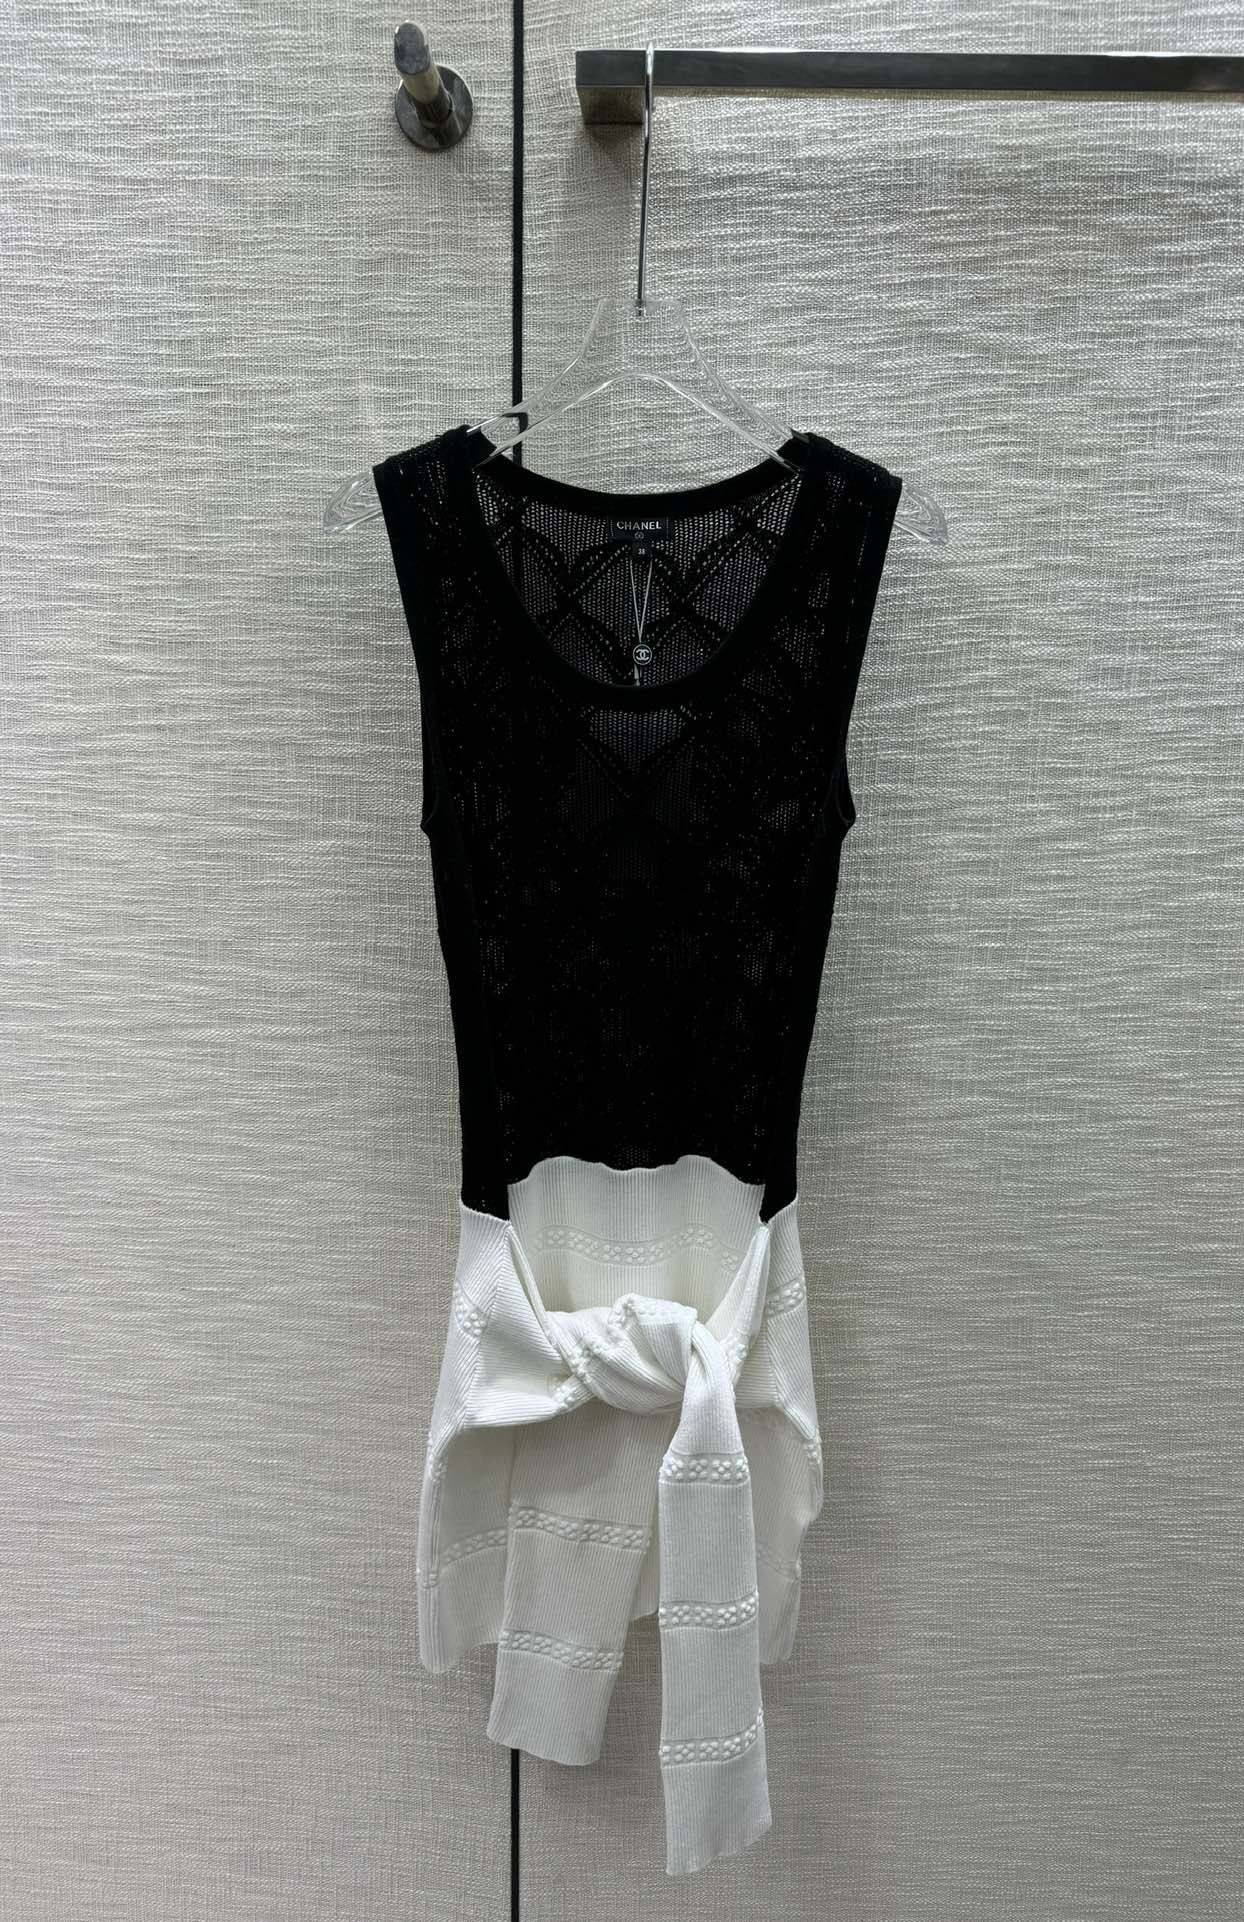 Chanel Clothing Dresses Tank Tops&Camis Black White Openwork Knitting Spring Collection Long Sleeve